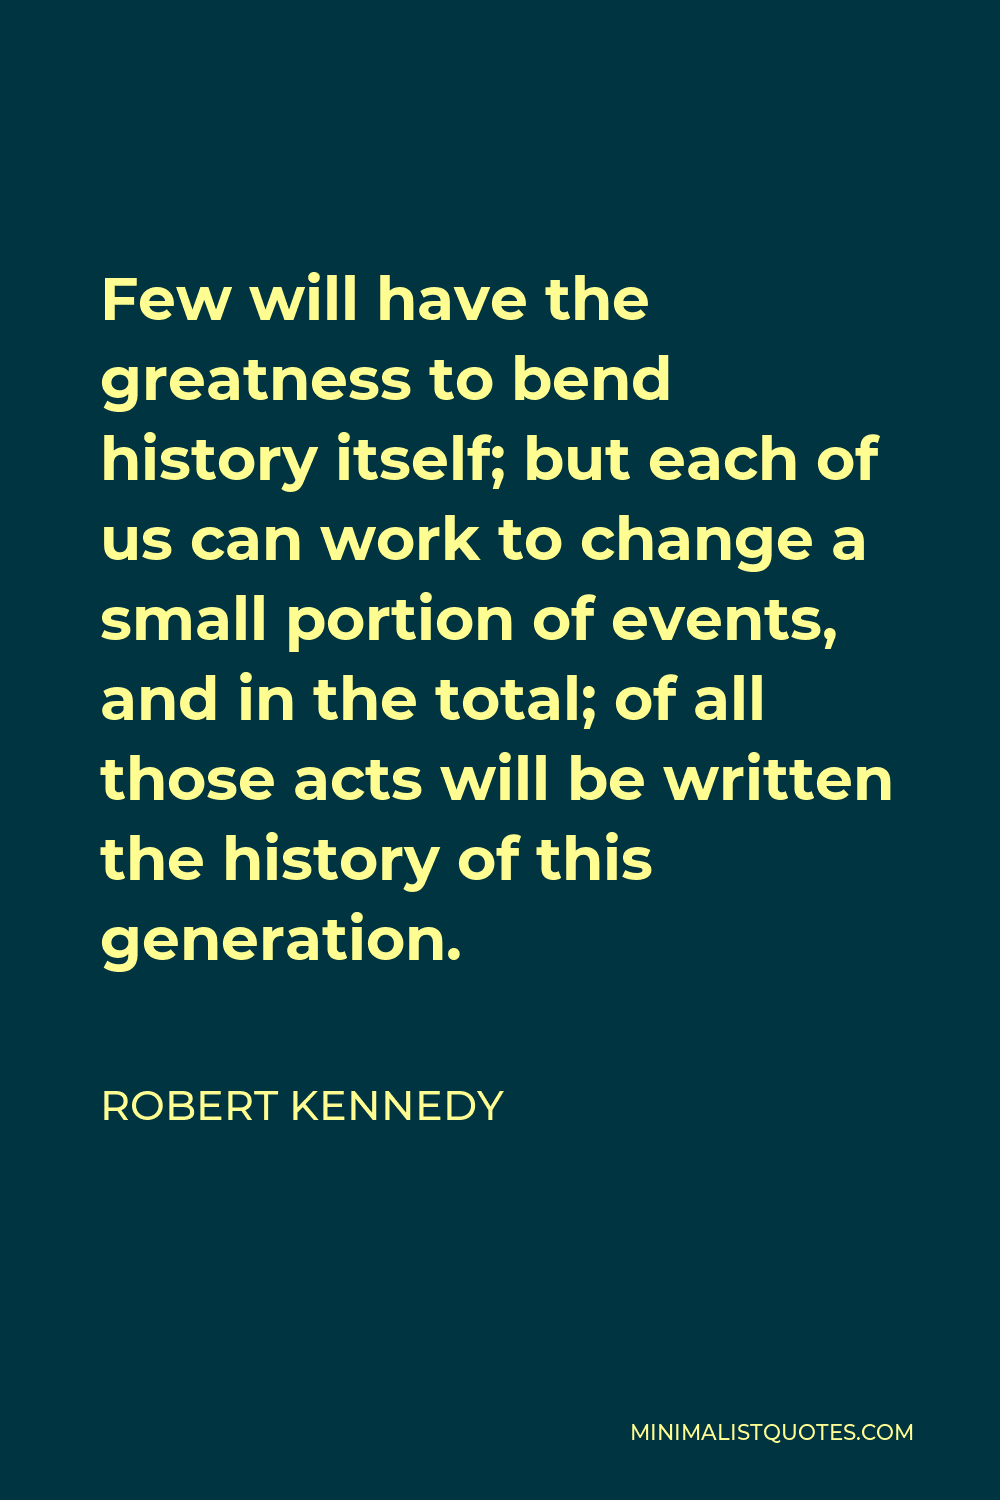 Robert Kennedy Quote - Few will have the greatness to bend history itself; but each of us can work to change a small portion of events, and in the total; of all those acts will be written the history of this generation.